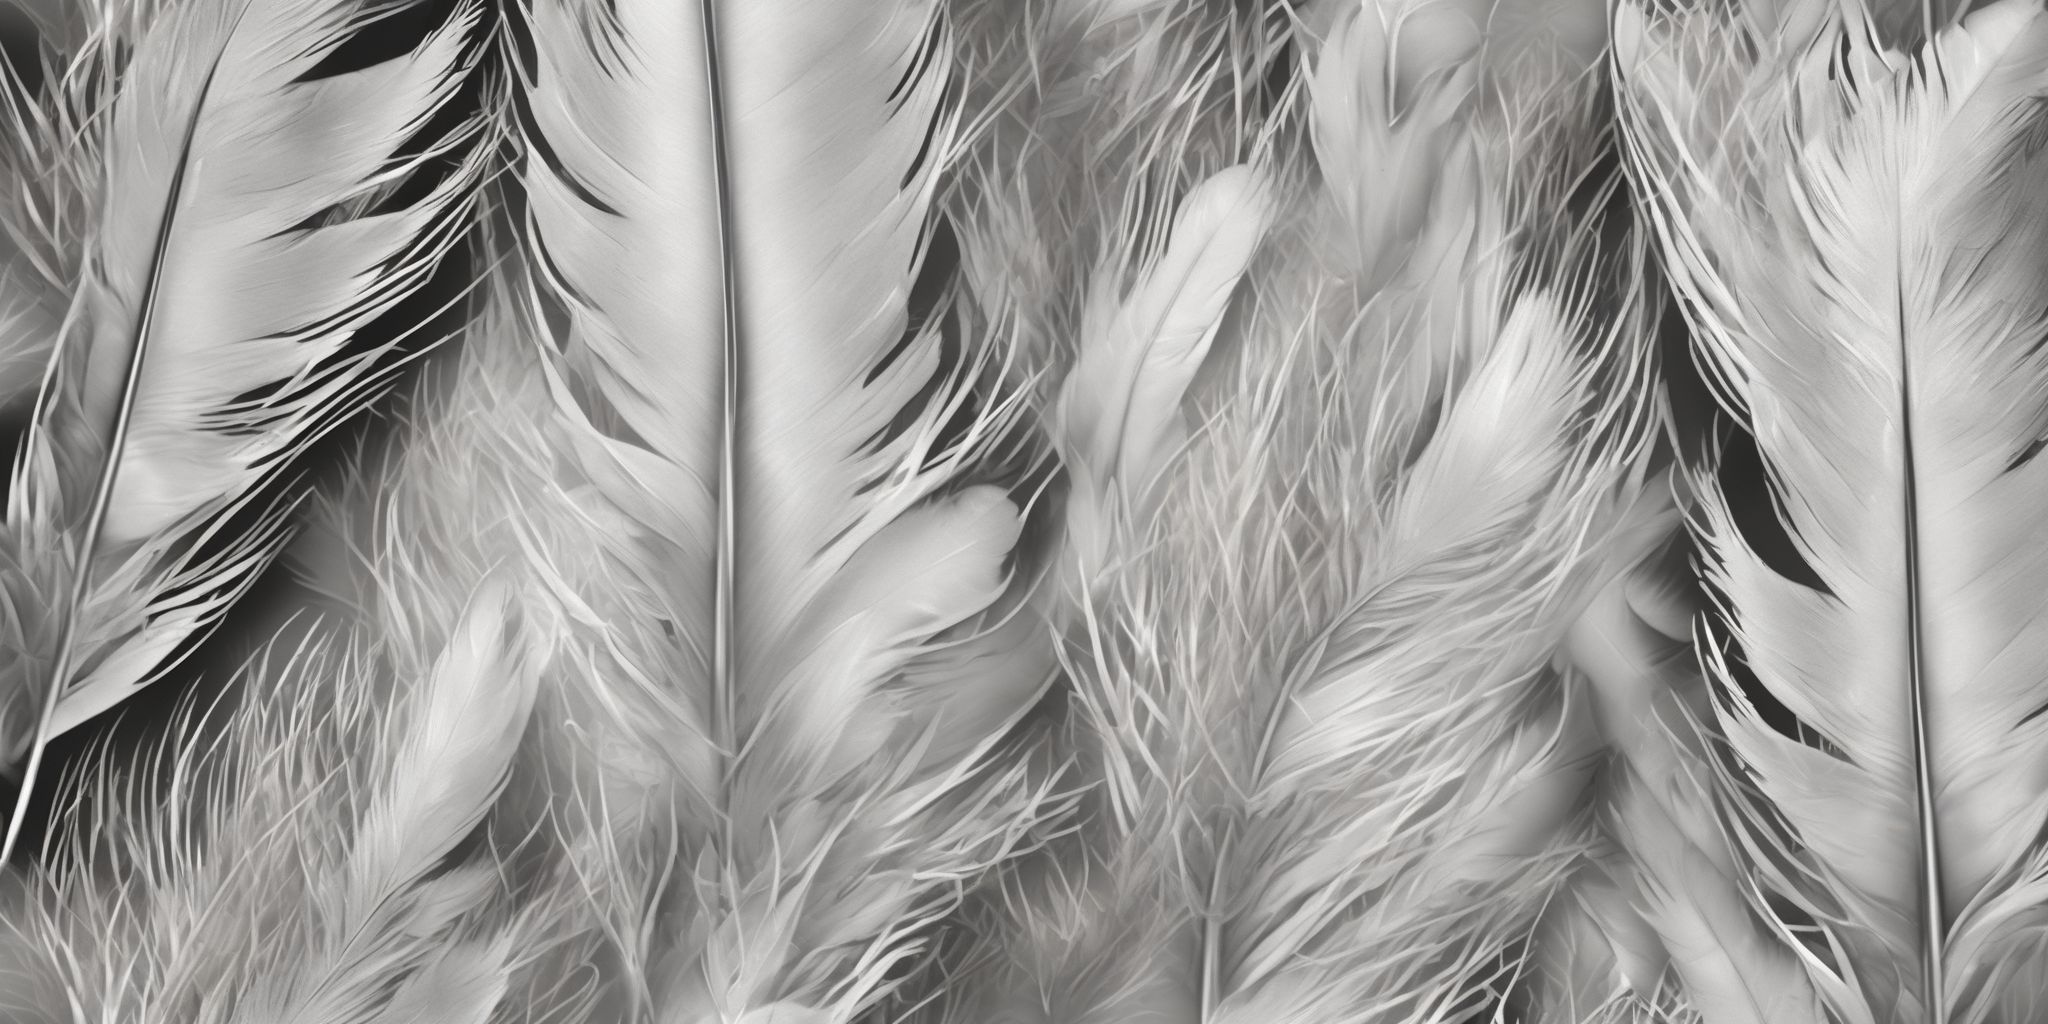 Feather  in realistic, photographic style